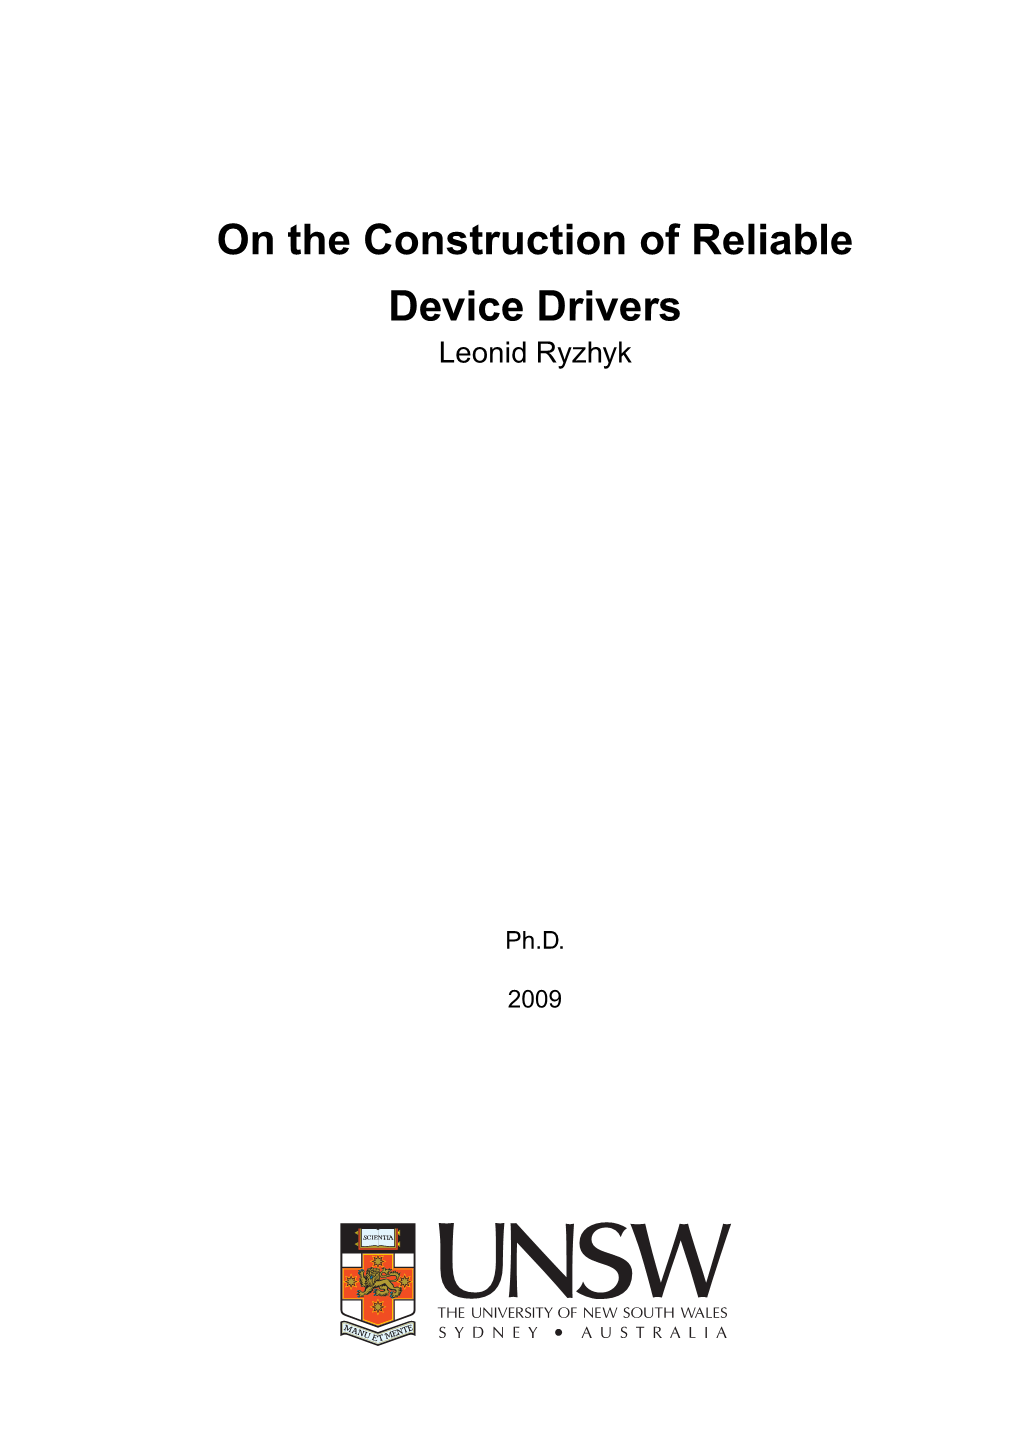 On the Construction of Reliable Device Drivers Leonid Ryzhyk